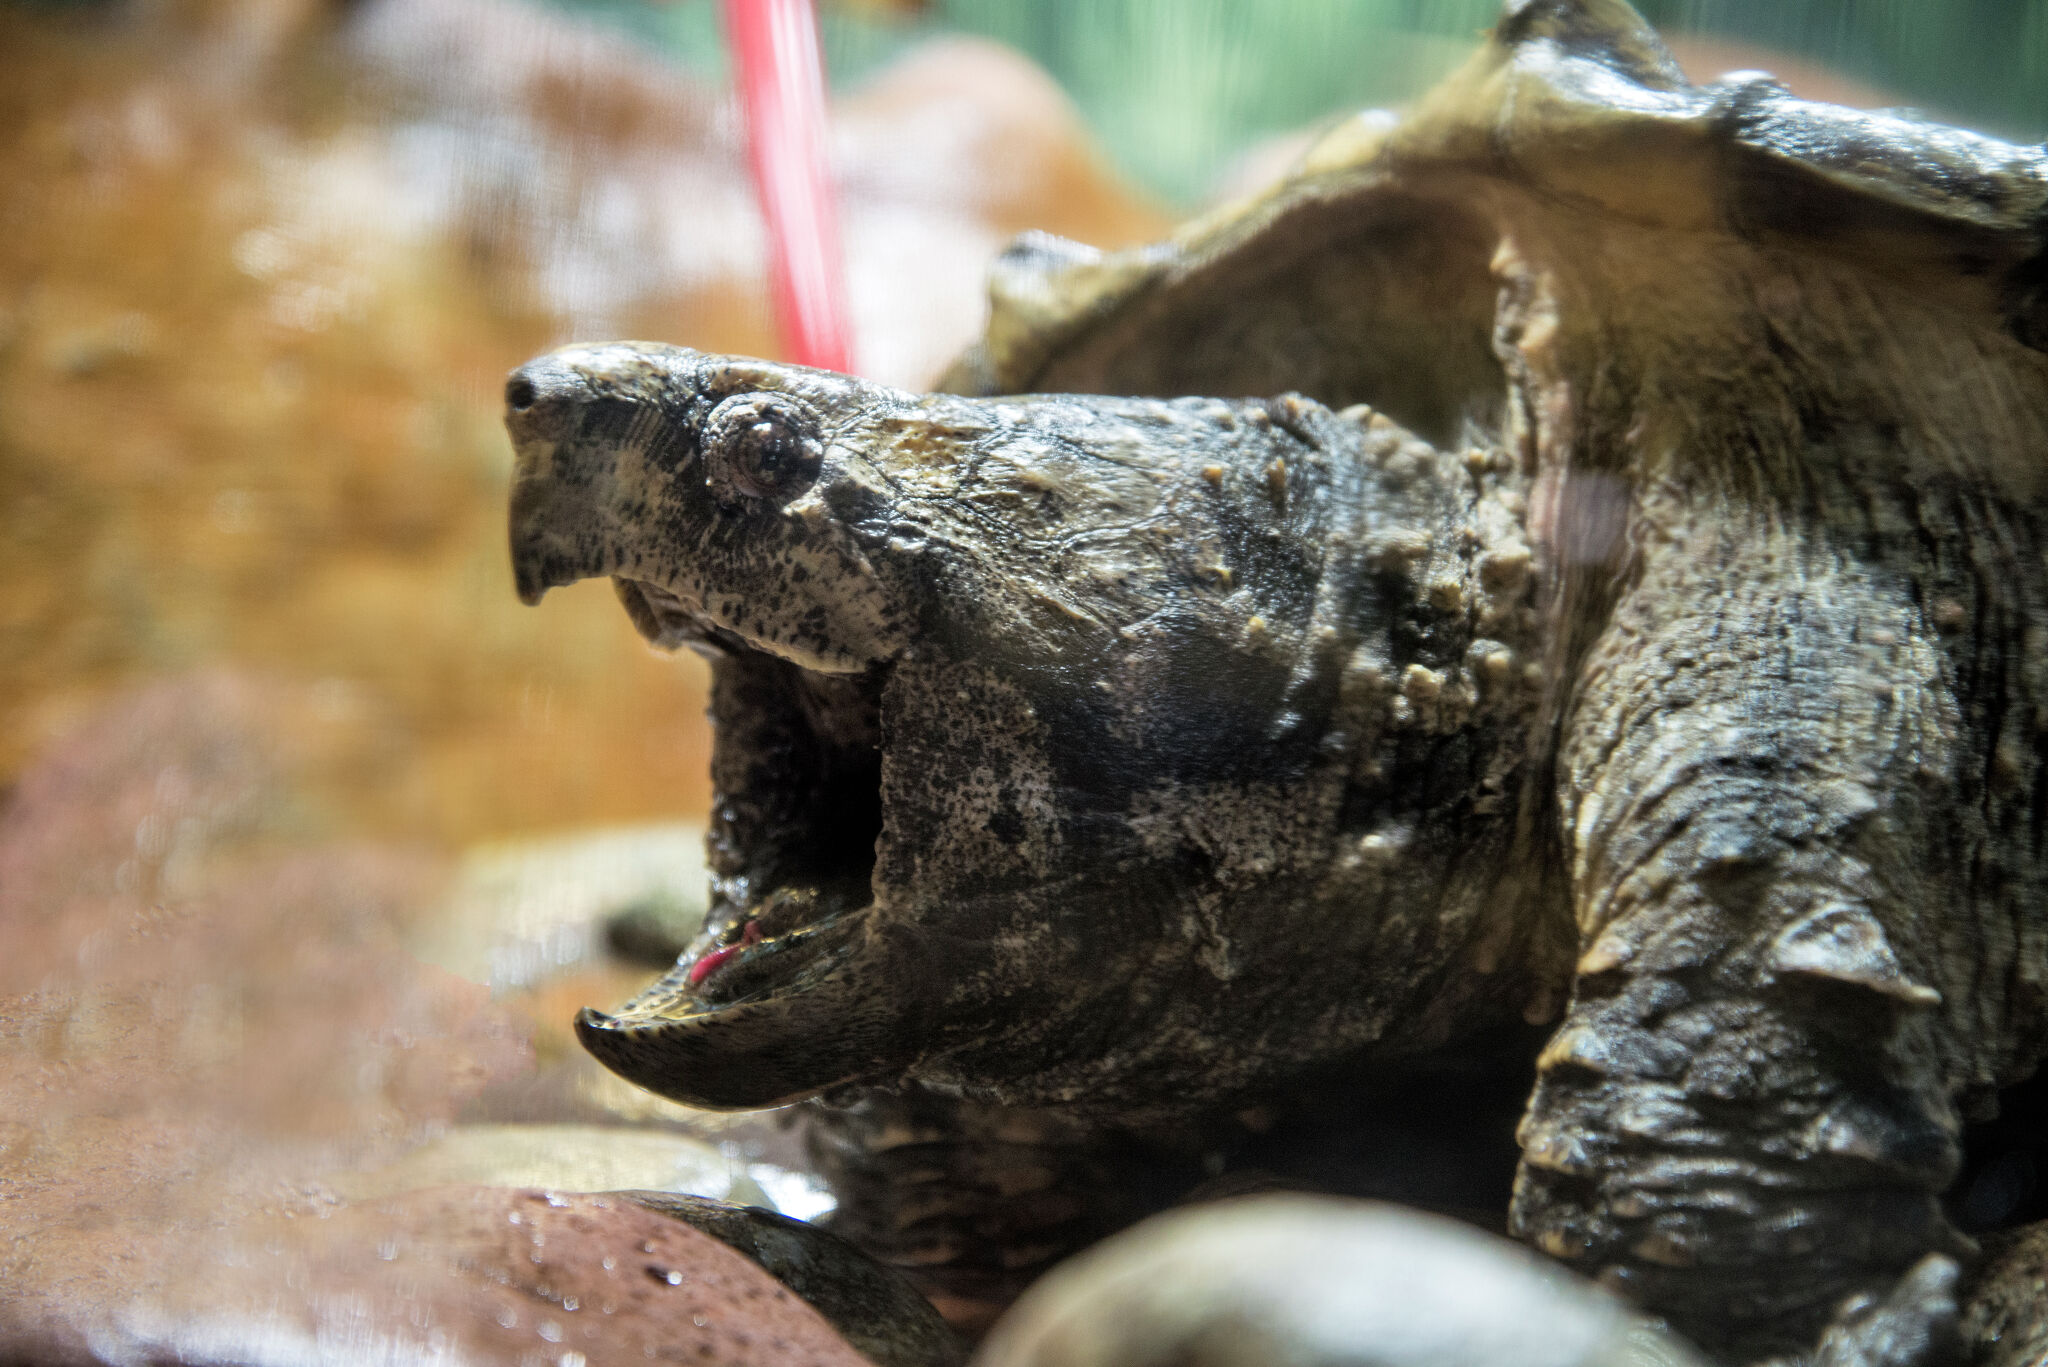 Alligator snapping turtle found dead in illegal trotline at Texas lake